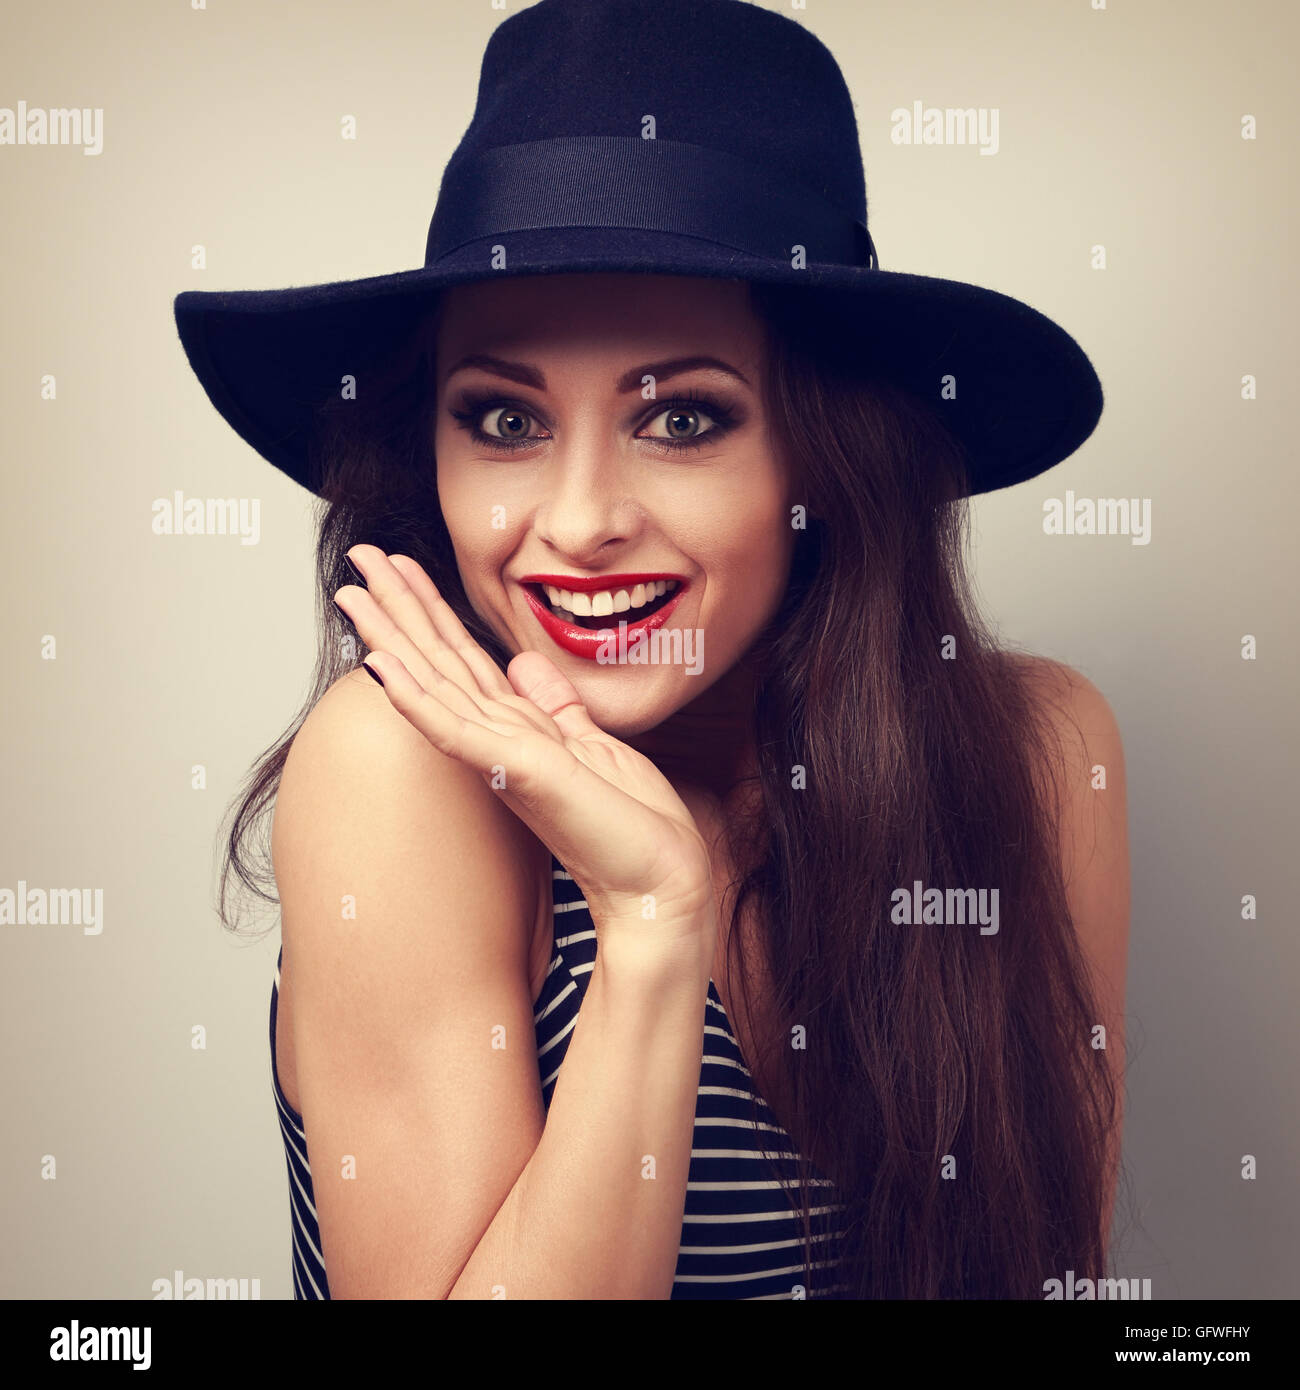 Happy bright makeup surprising woman looking funny in fashion blue hat. Toned vintage portrait Stock Photo